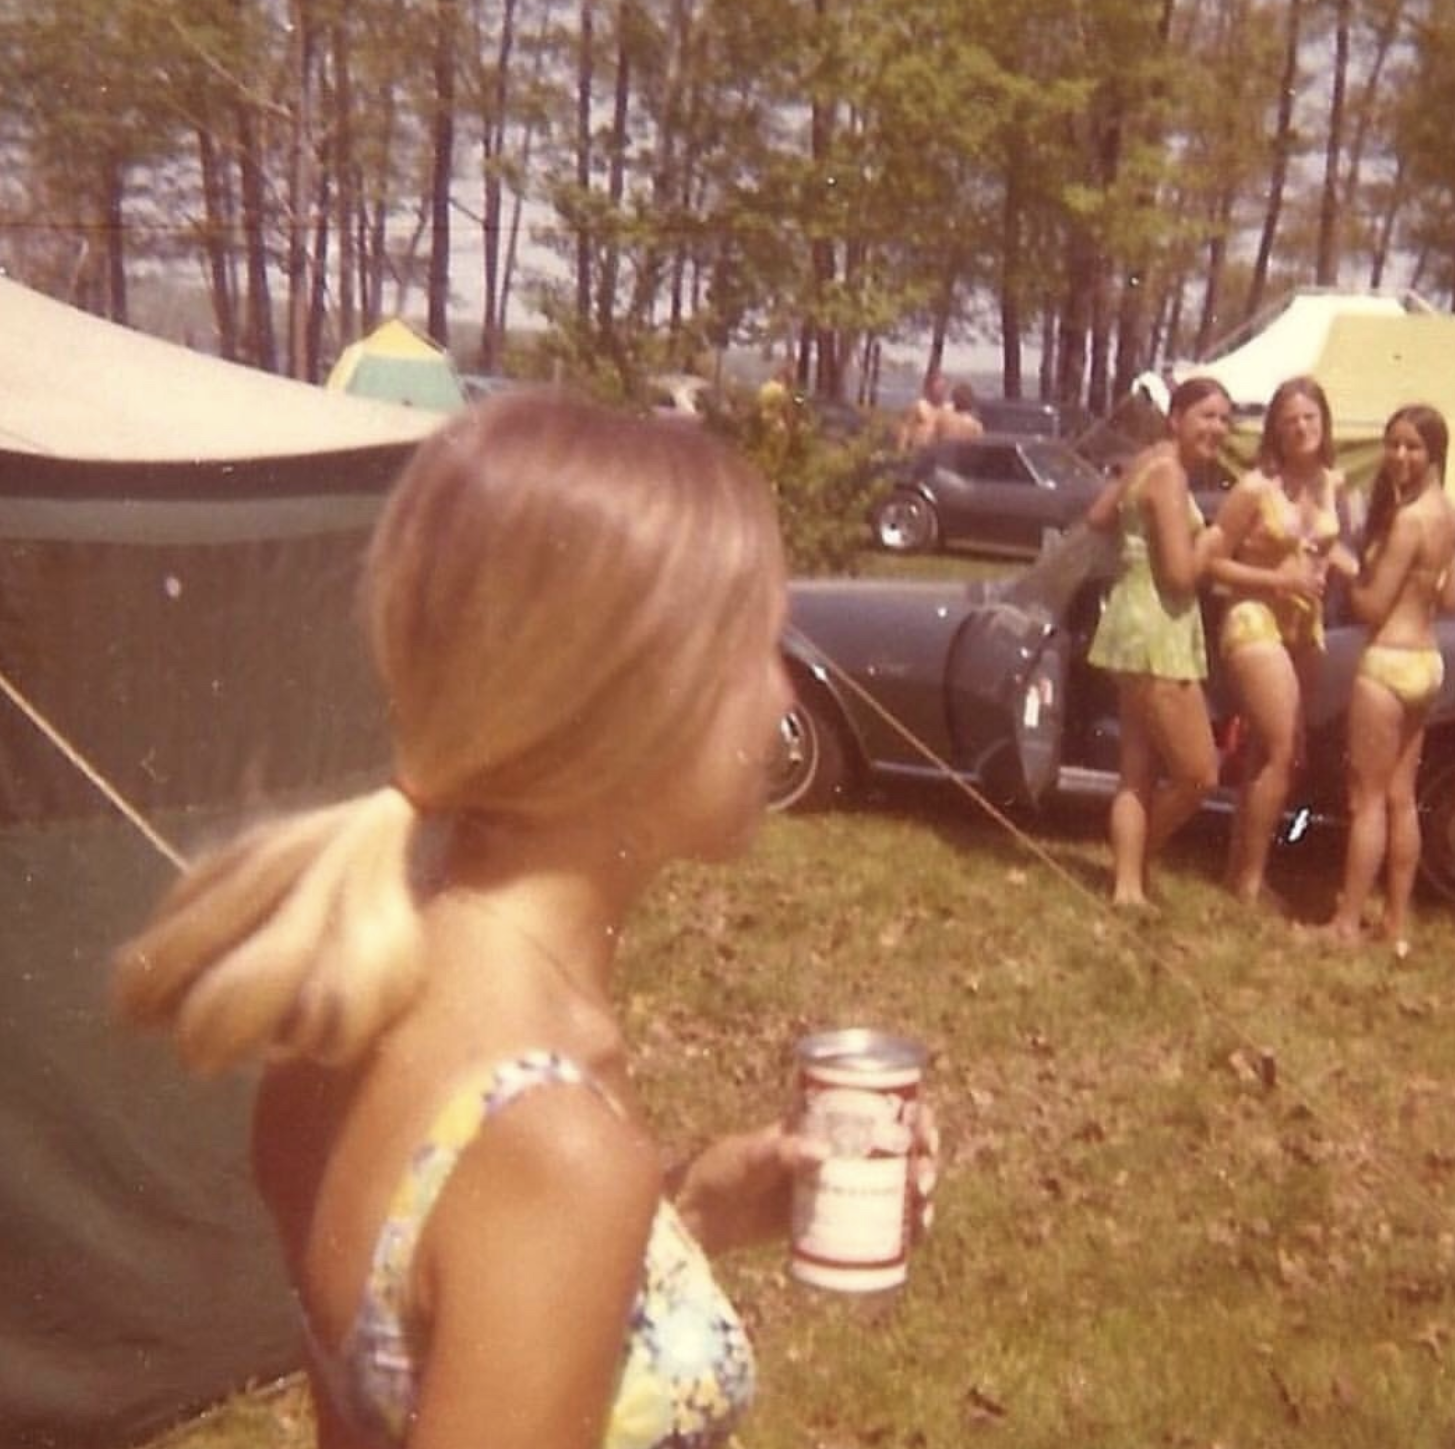 19 Photos of Our Parents Partying Hard